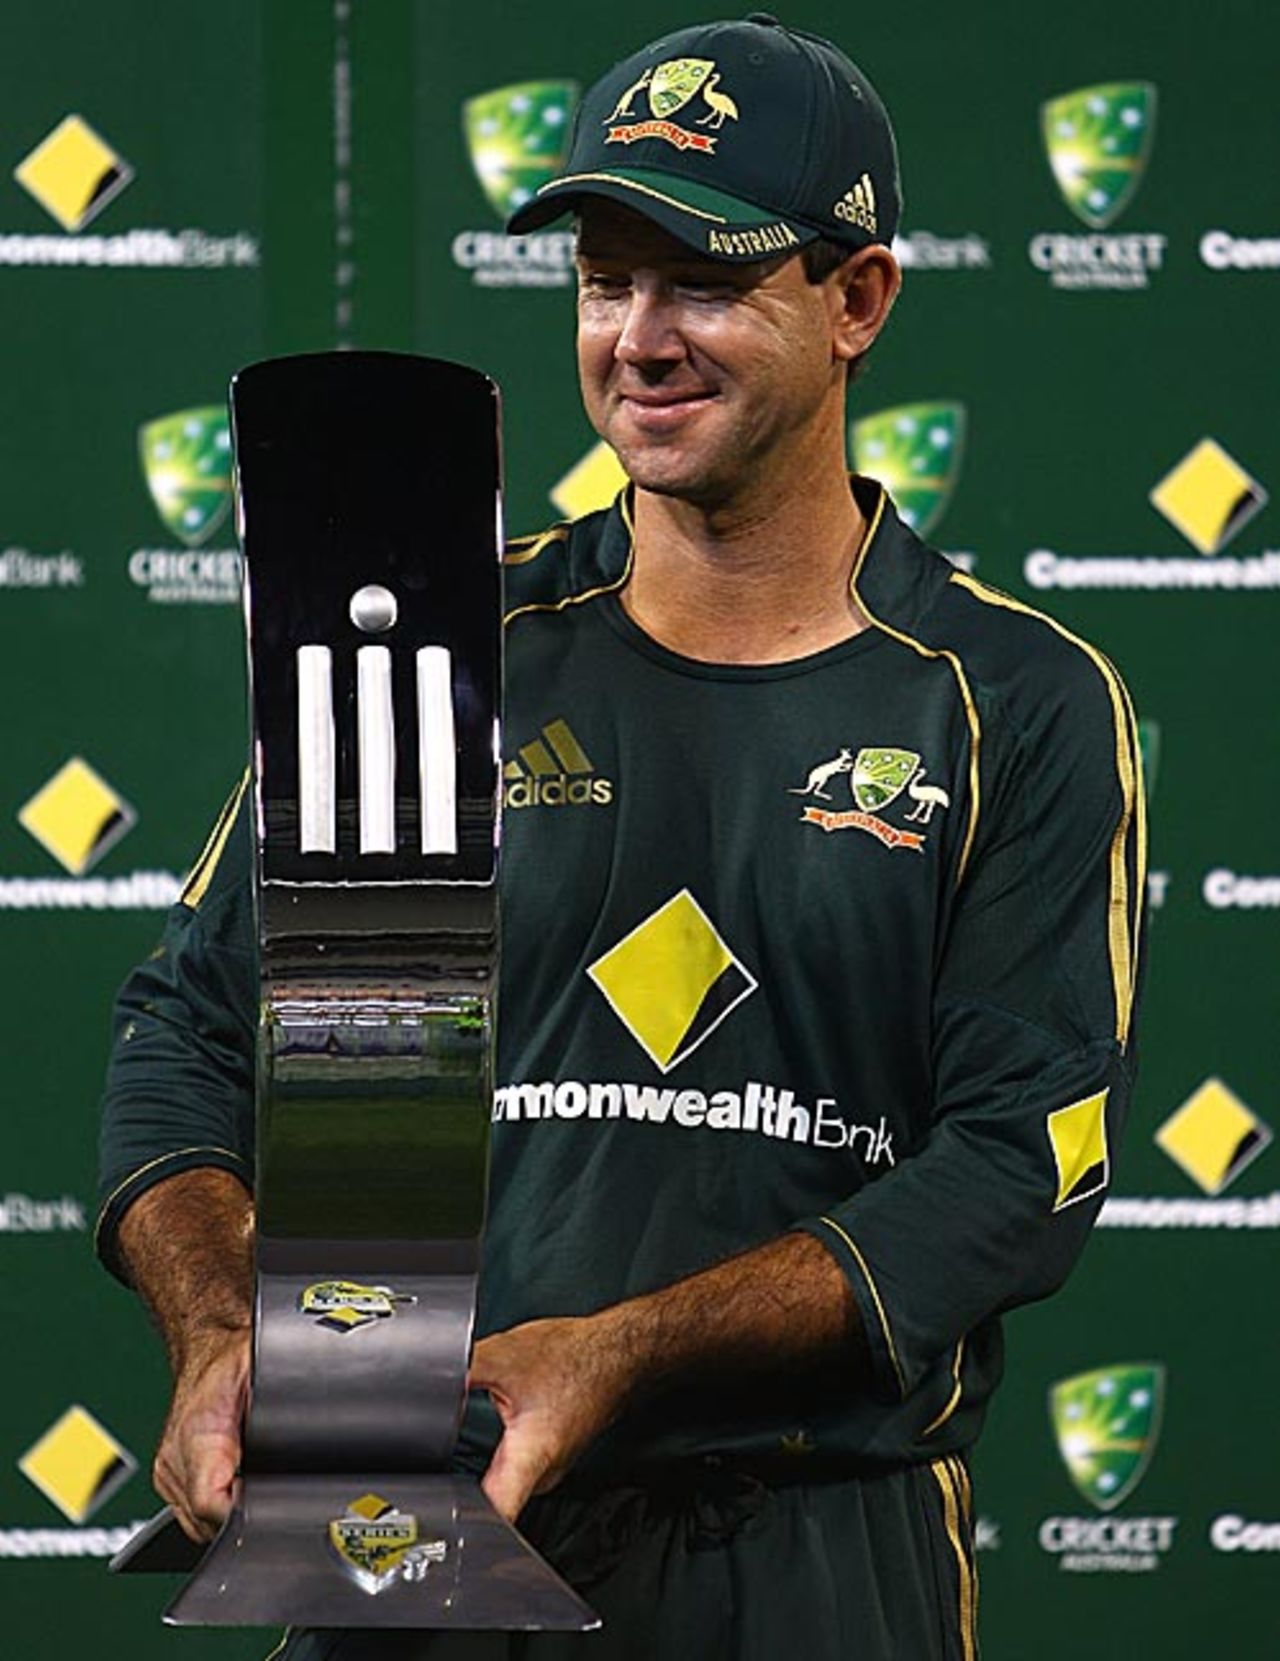 Ricky Ponting with the ODI series trophy, Australia v West Indies, 5th ODI, Melbourne, 19 February, 2010